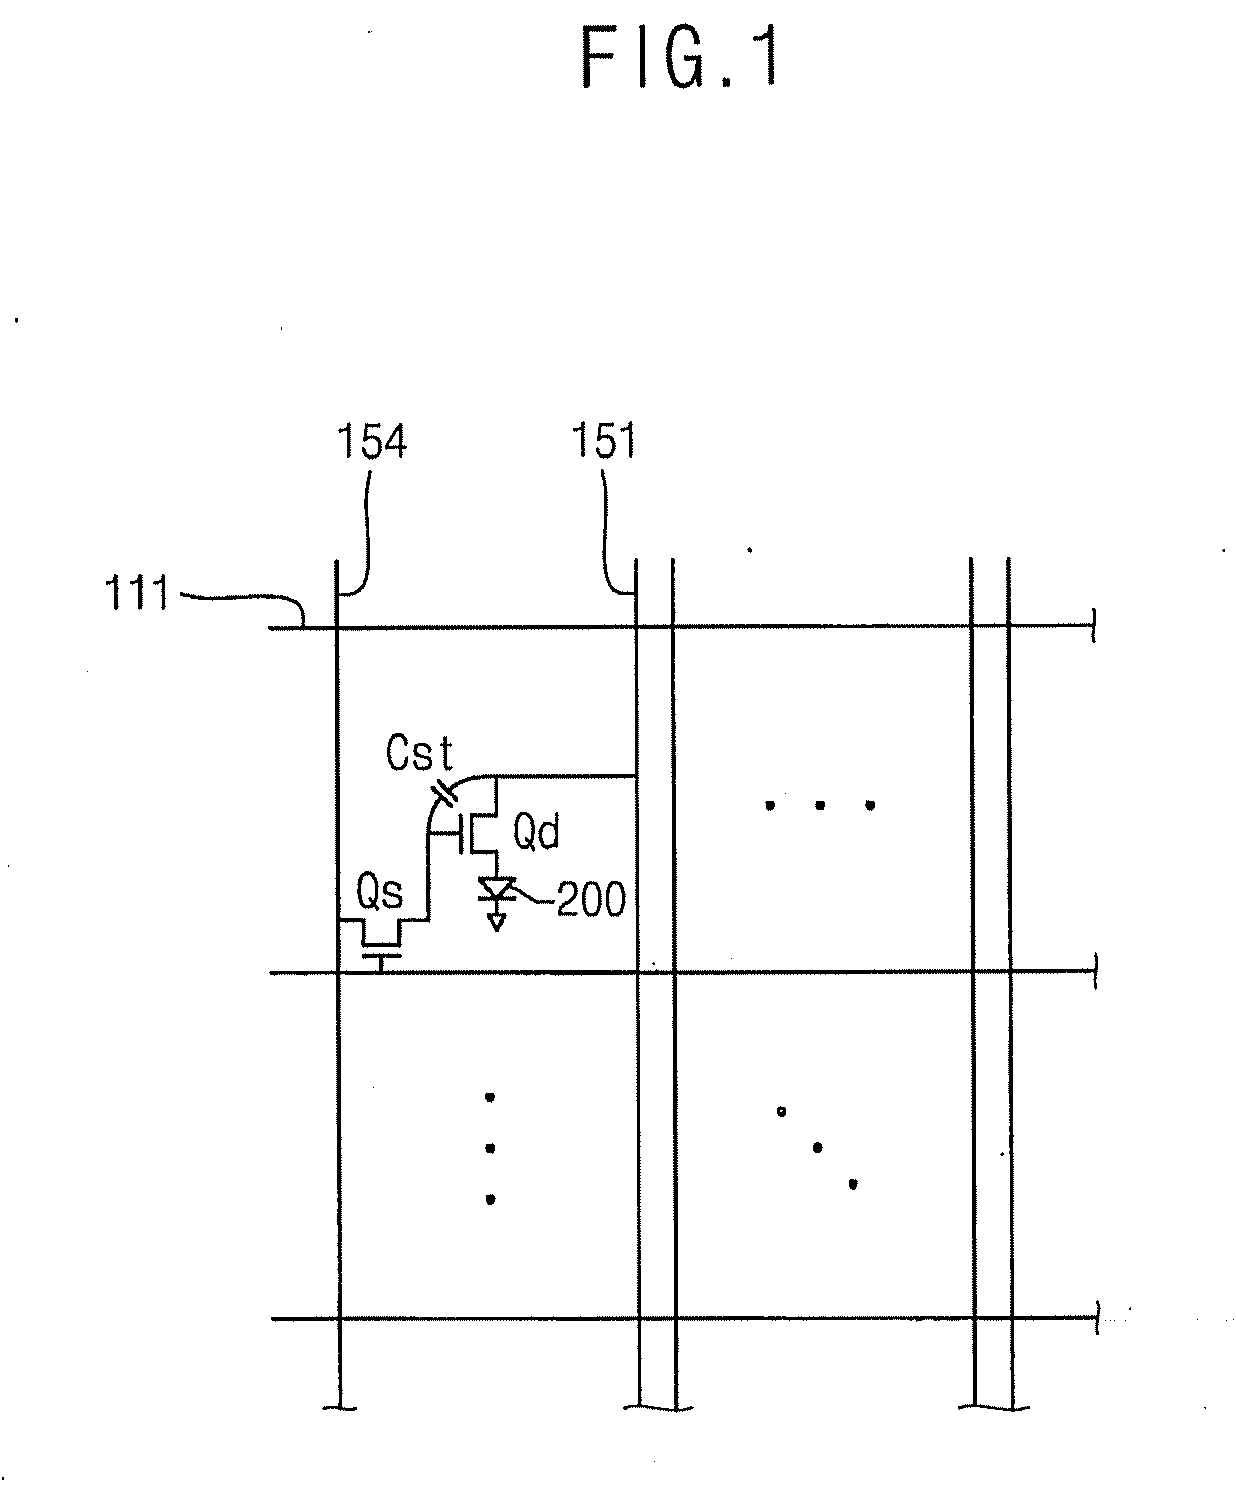 Display apparatus and method of manufacturing thereof